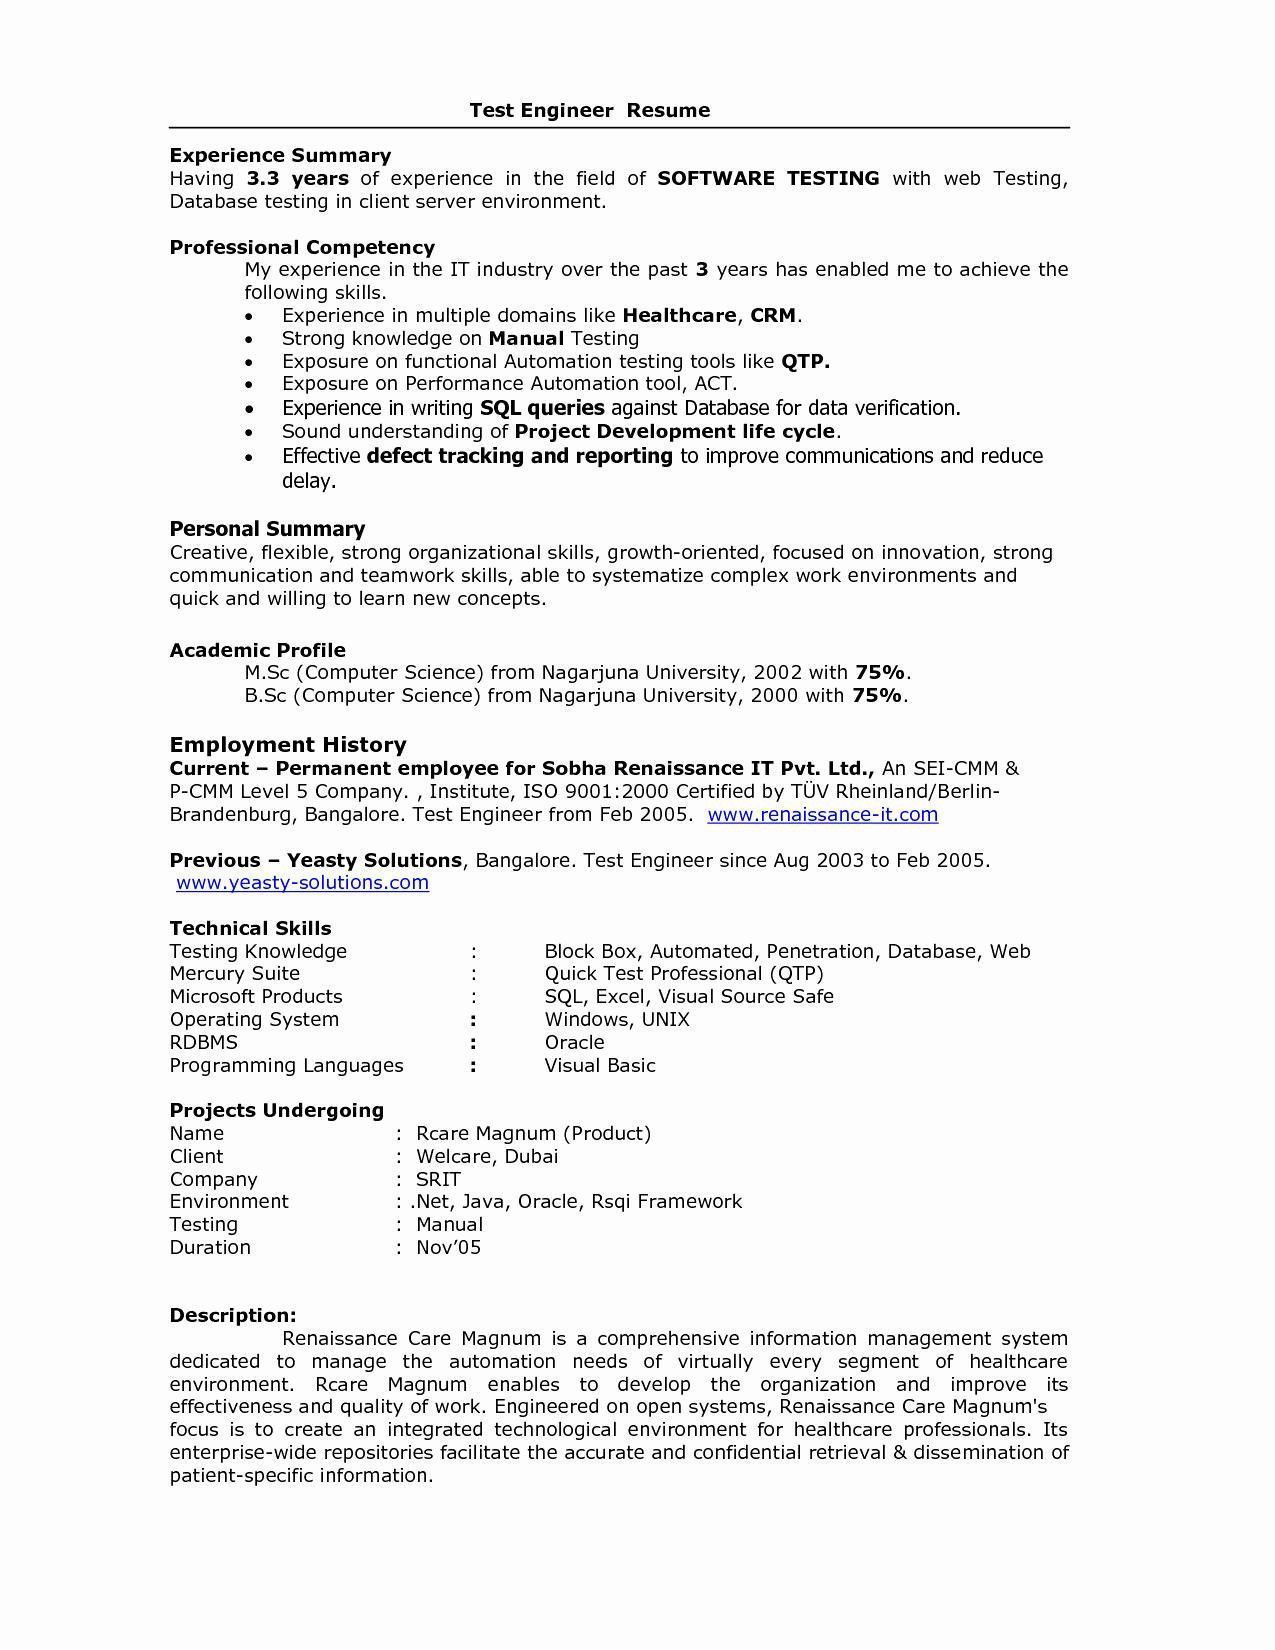 Resume Templates for Experienced software Testing Professionals Microsoft Excel Testversion Resume Examples, Basic Resume …